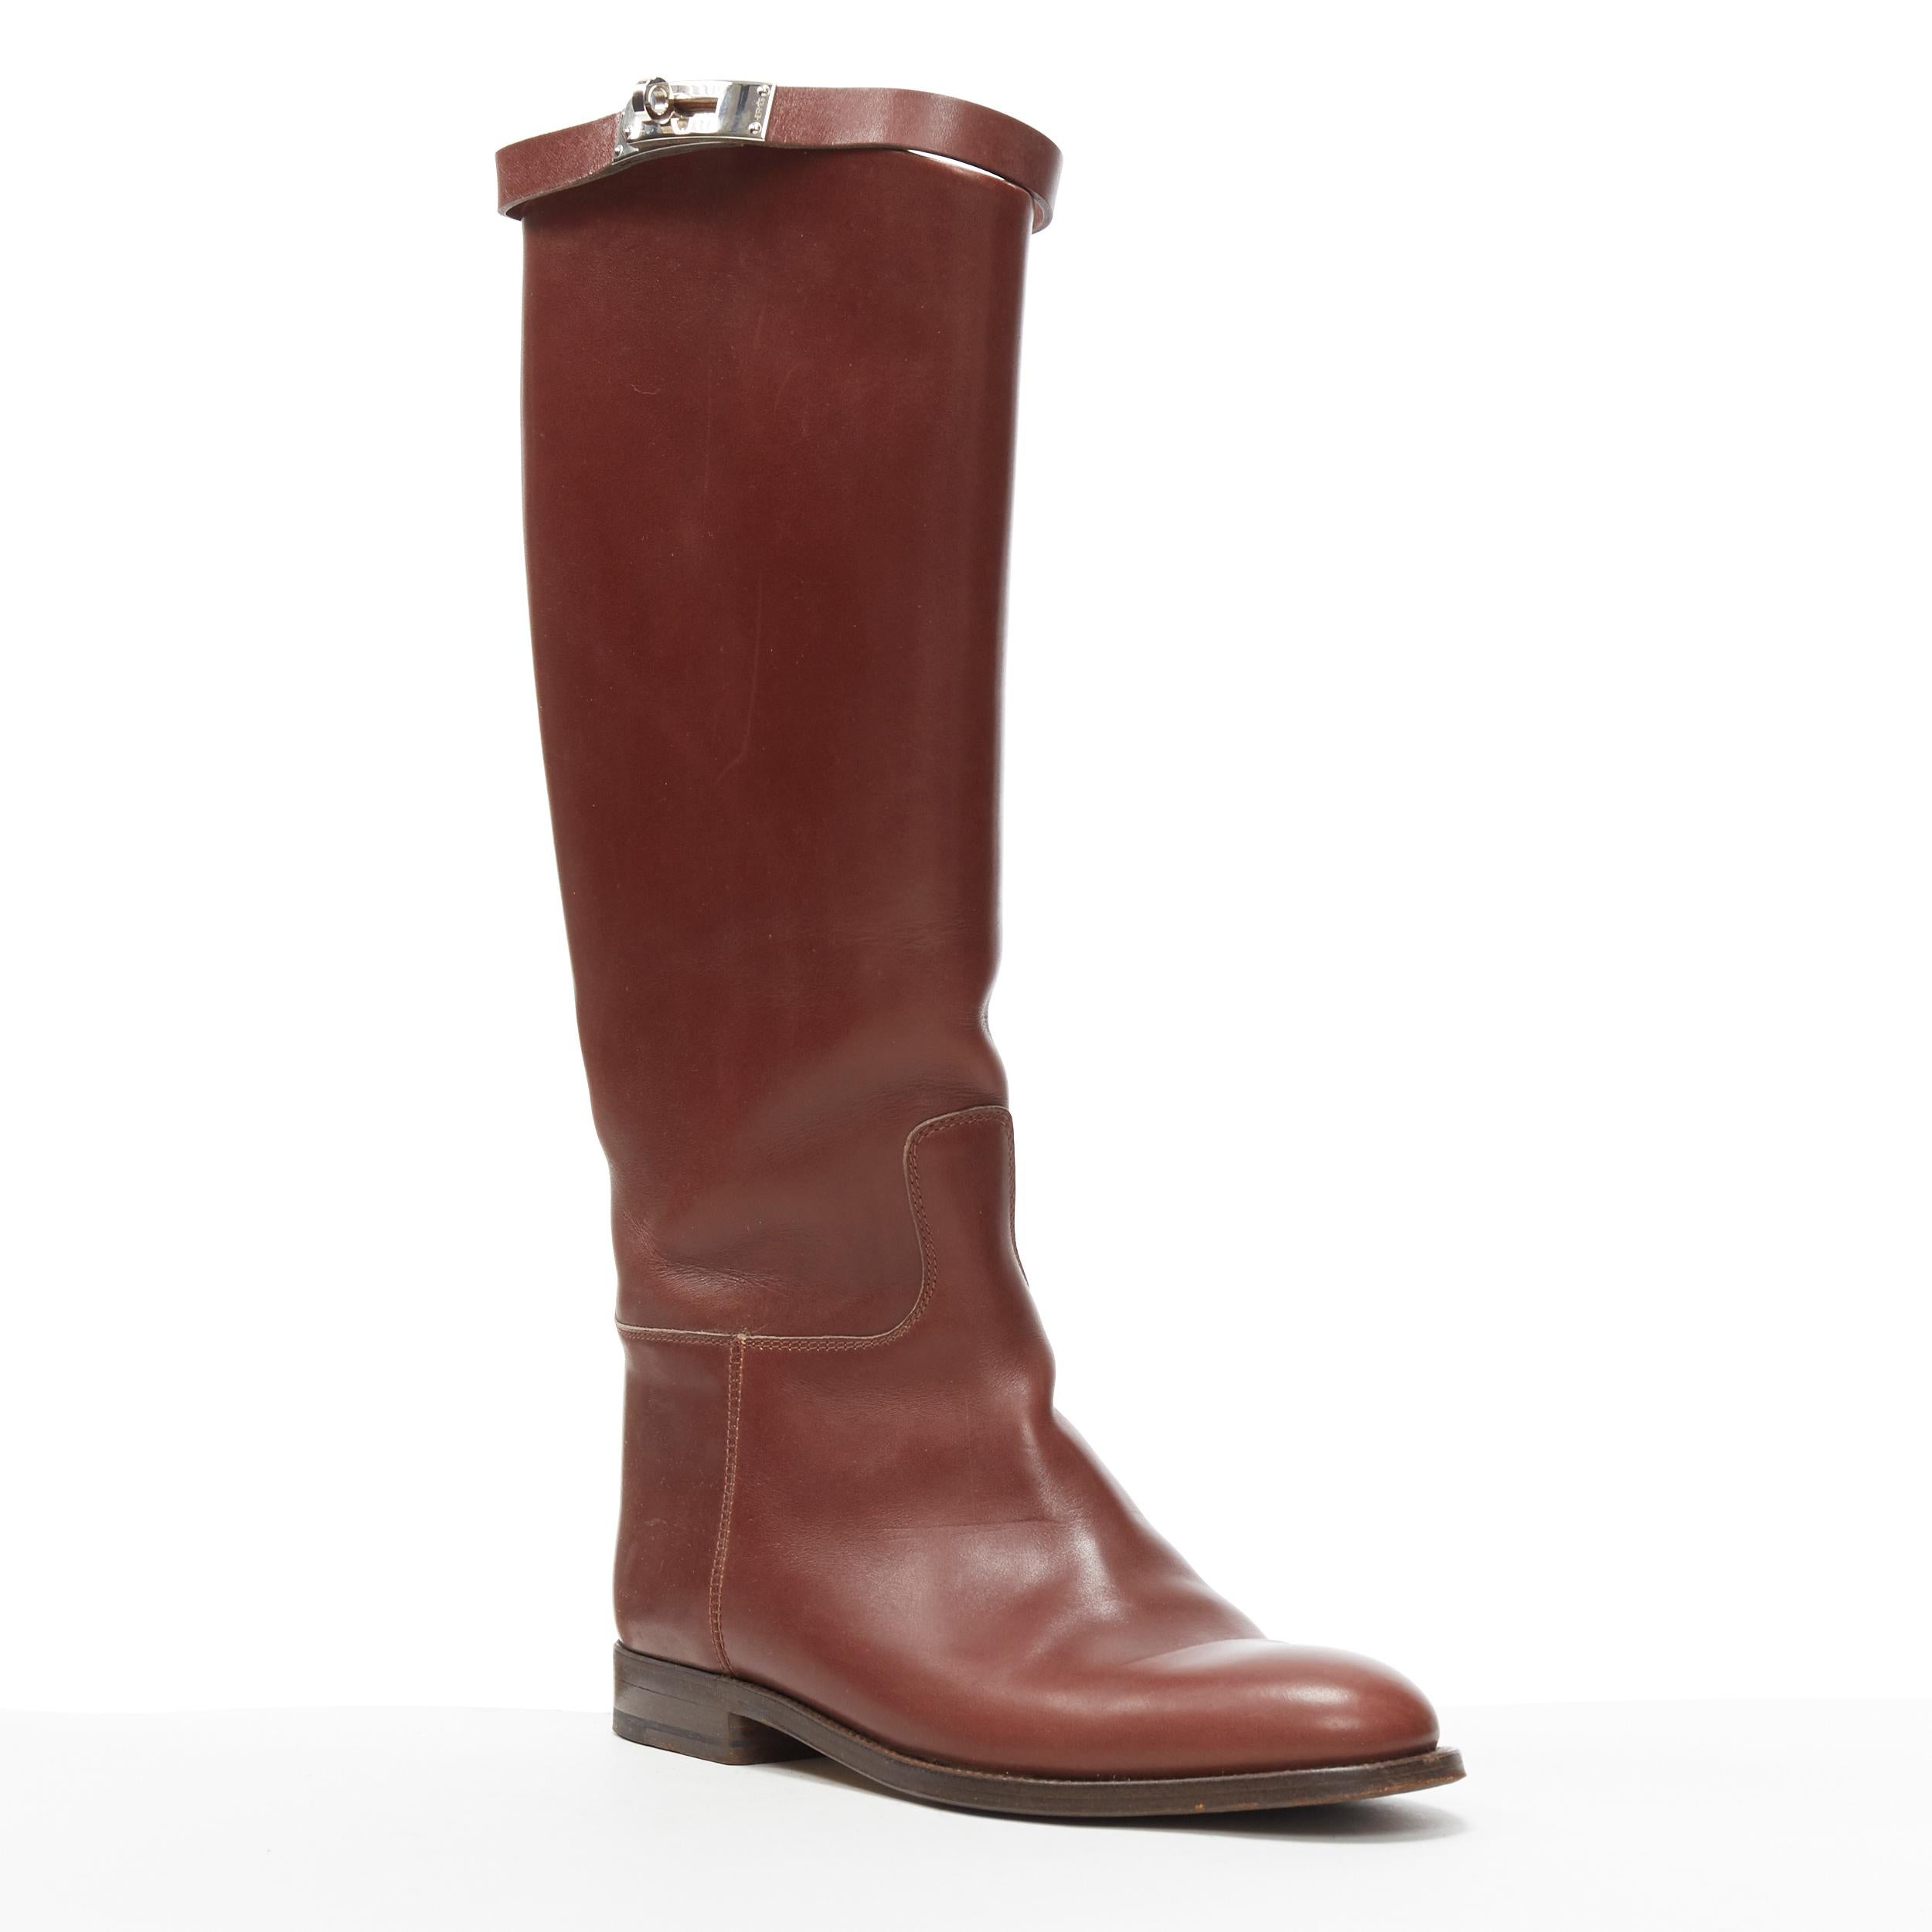 HERMES Jumping Kelly brown leather silver buckle strap flat ridiing boots EU39
Brand: Hermes
Model Name / Style: Riding boots
Material: Leather
Color: Brown
Pattern: Solid
Closure: Pull on
Extra Detail: Silver-tone buckle detail. Flat (Under 1 in)